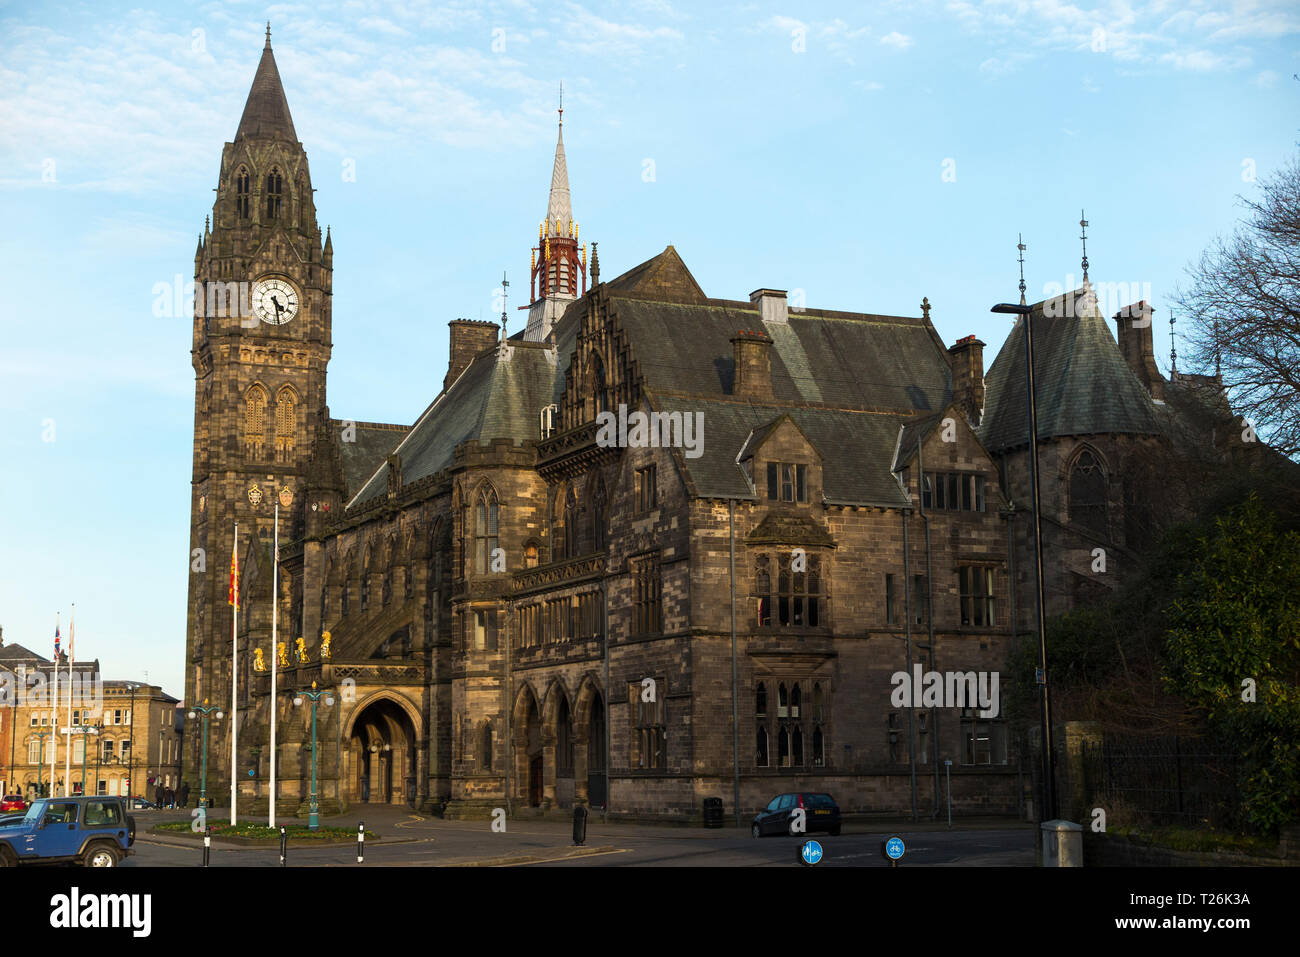 Rochdale town Hall and tower clock with blue sky and late afternoon sun / sunny / sunshine. Rochdale Lancashire. UK. (106) Stock Photo